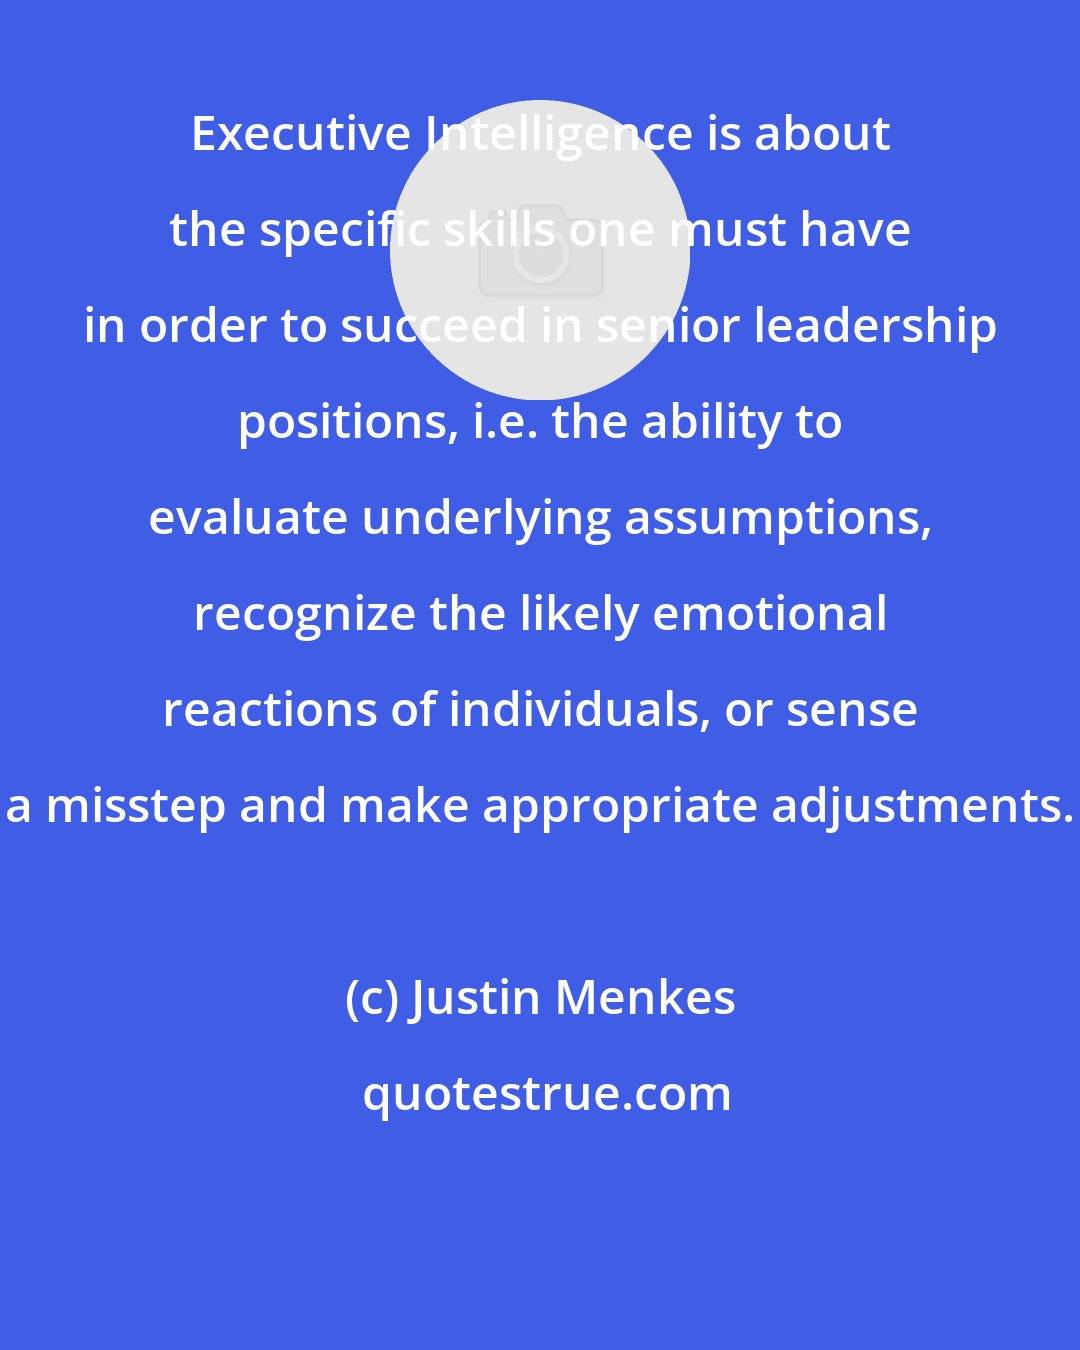 Justin Menkes: Executive Intelligence is about the specific skills one must have in order to succeed in senior leadership positions, i.e. the ability to evaluate underlying assumptions, recognize the likely emotional reactions of individuals, or sense a misstep and make appropriate adjustments.